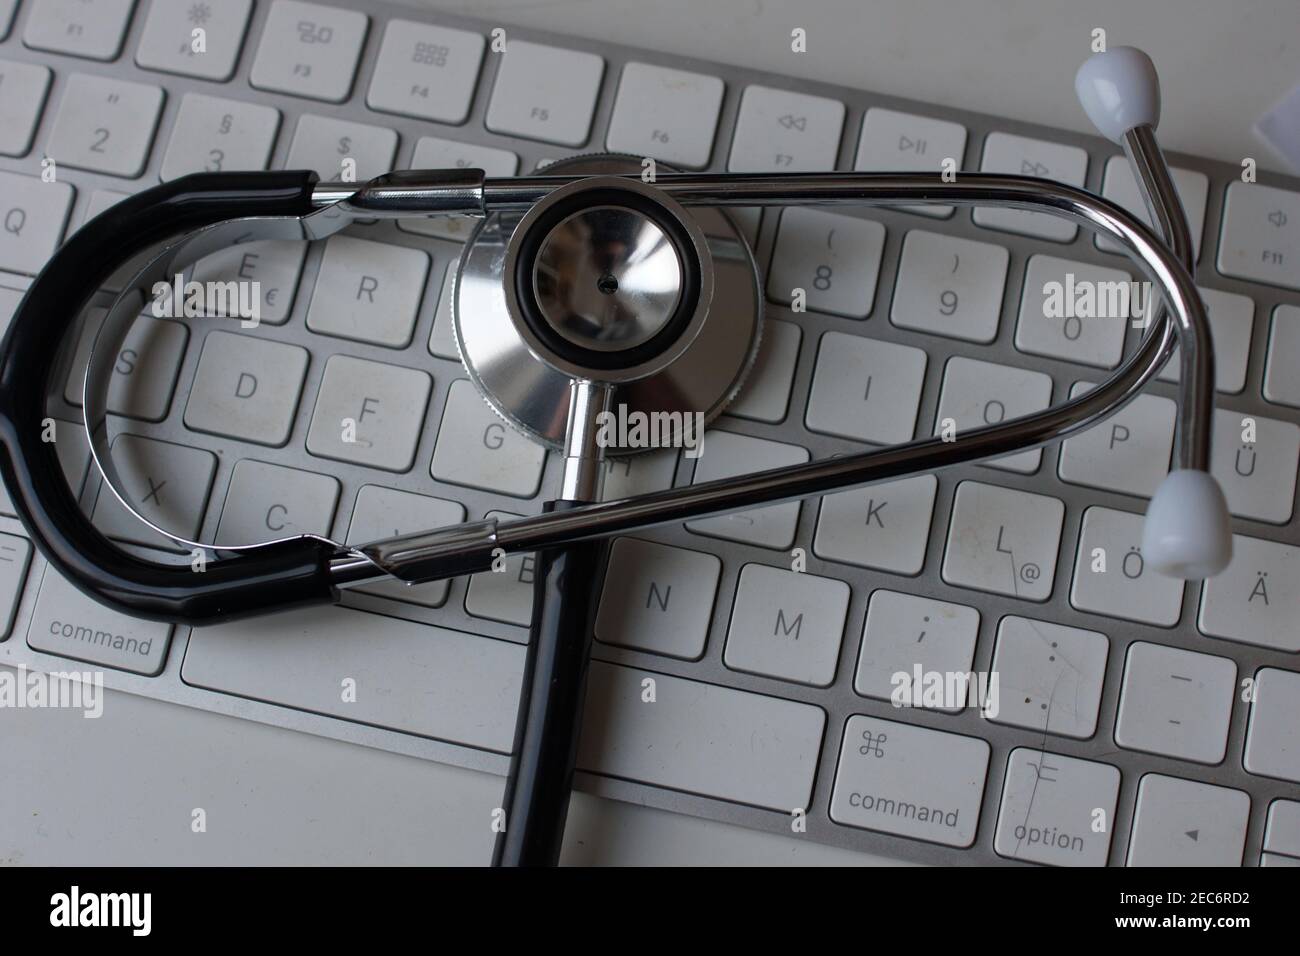 Stethoscope on a computer keyboard. Stock Photo